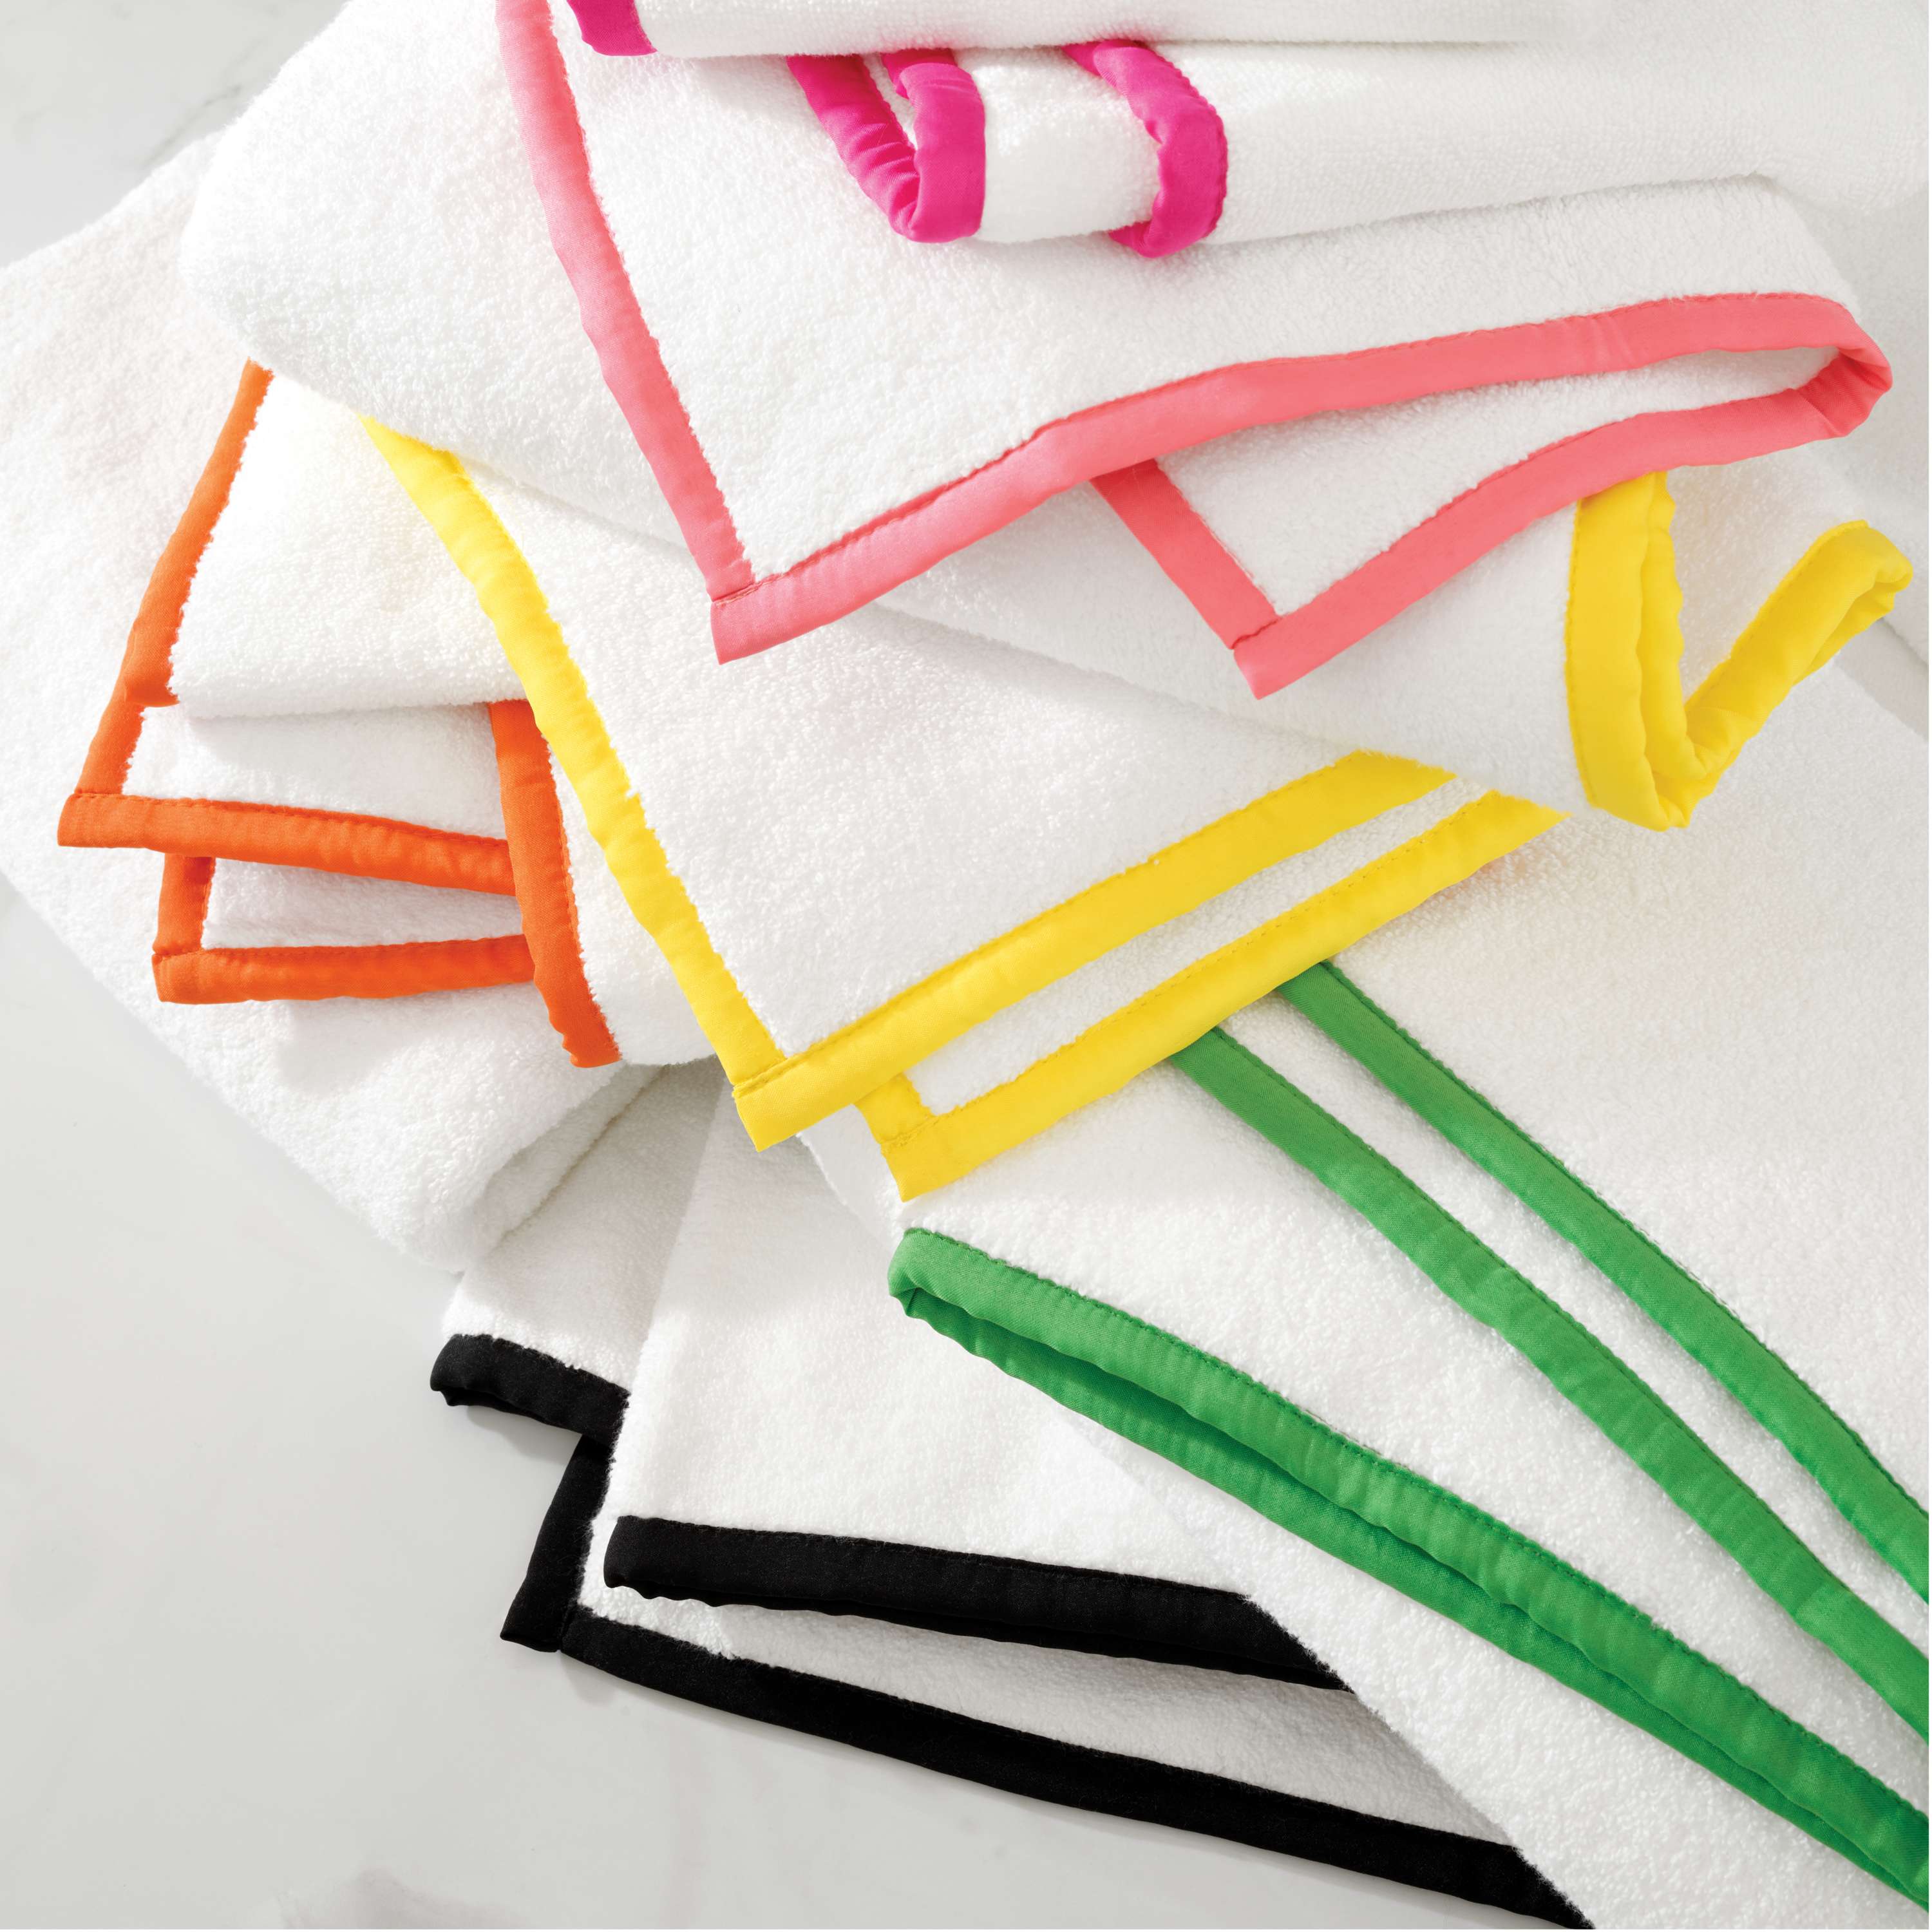 Hanging Hand Towels - Thyme - Pine Hill Collections